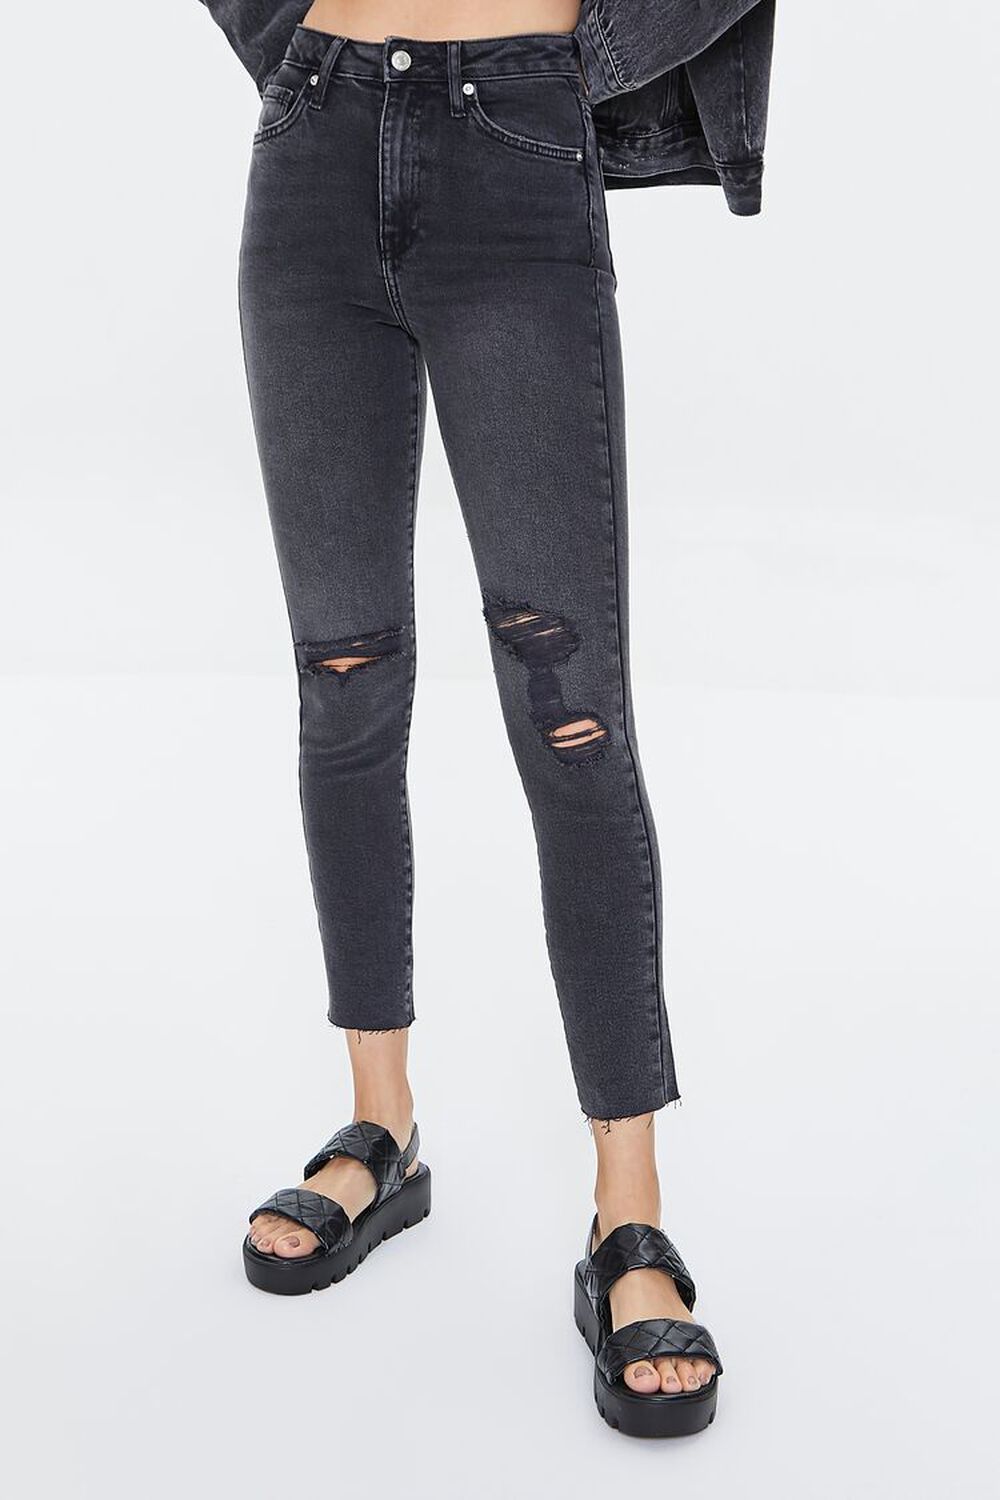 WASHED BLACK Recycled Cotton Distressed Skinny Jeans, image 2